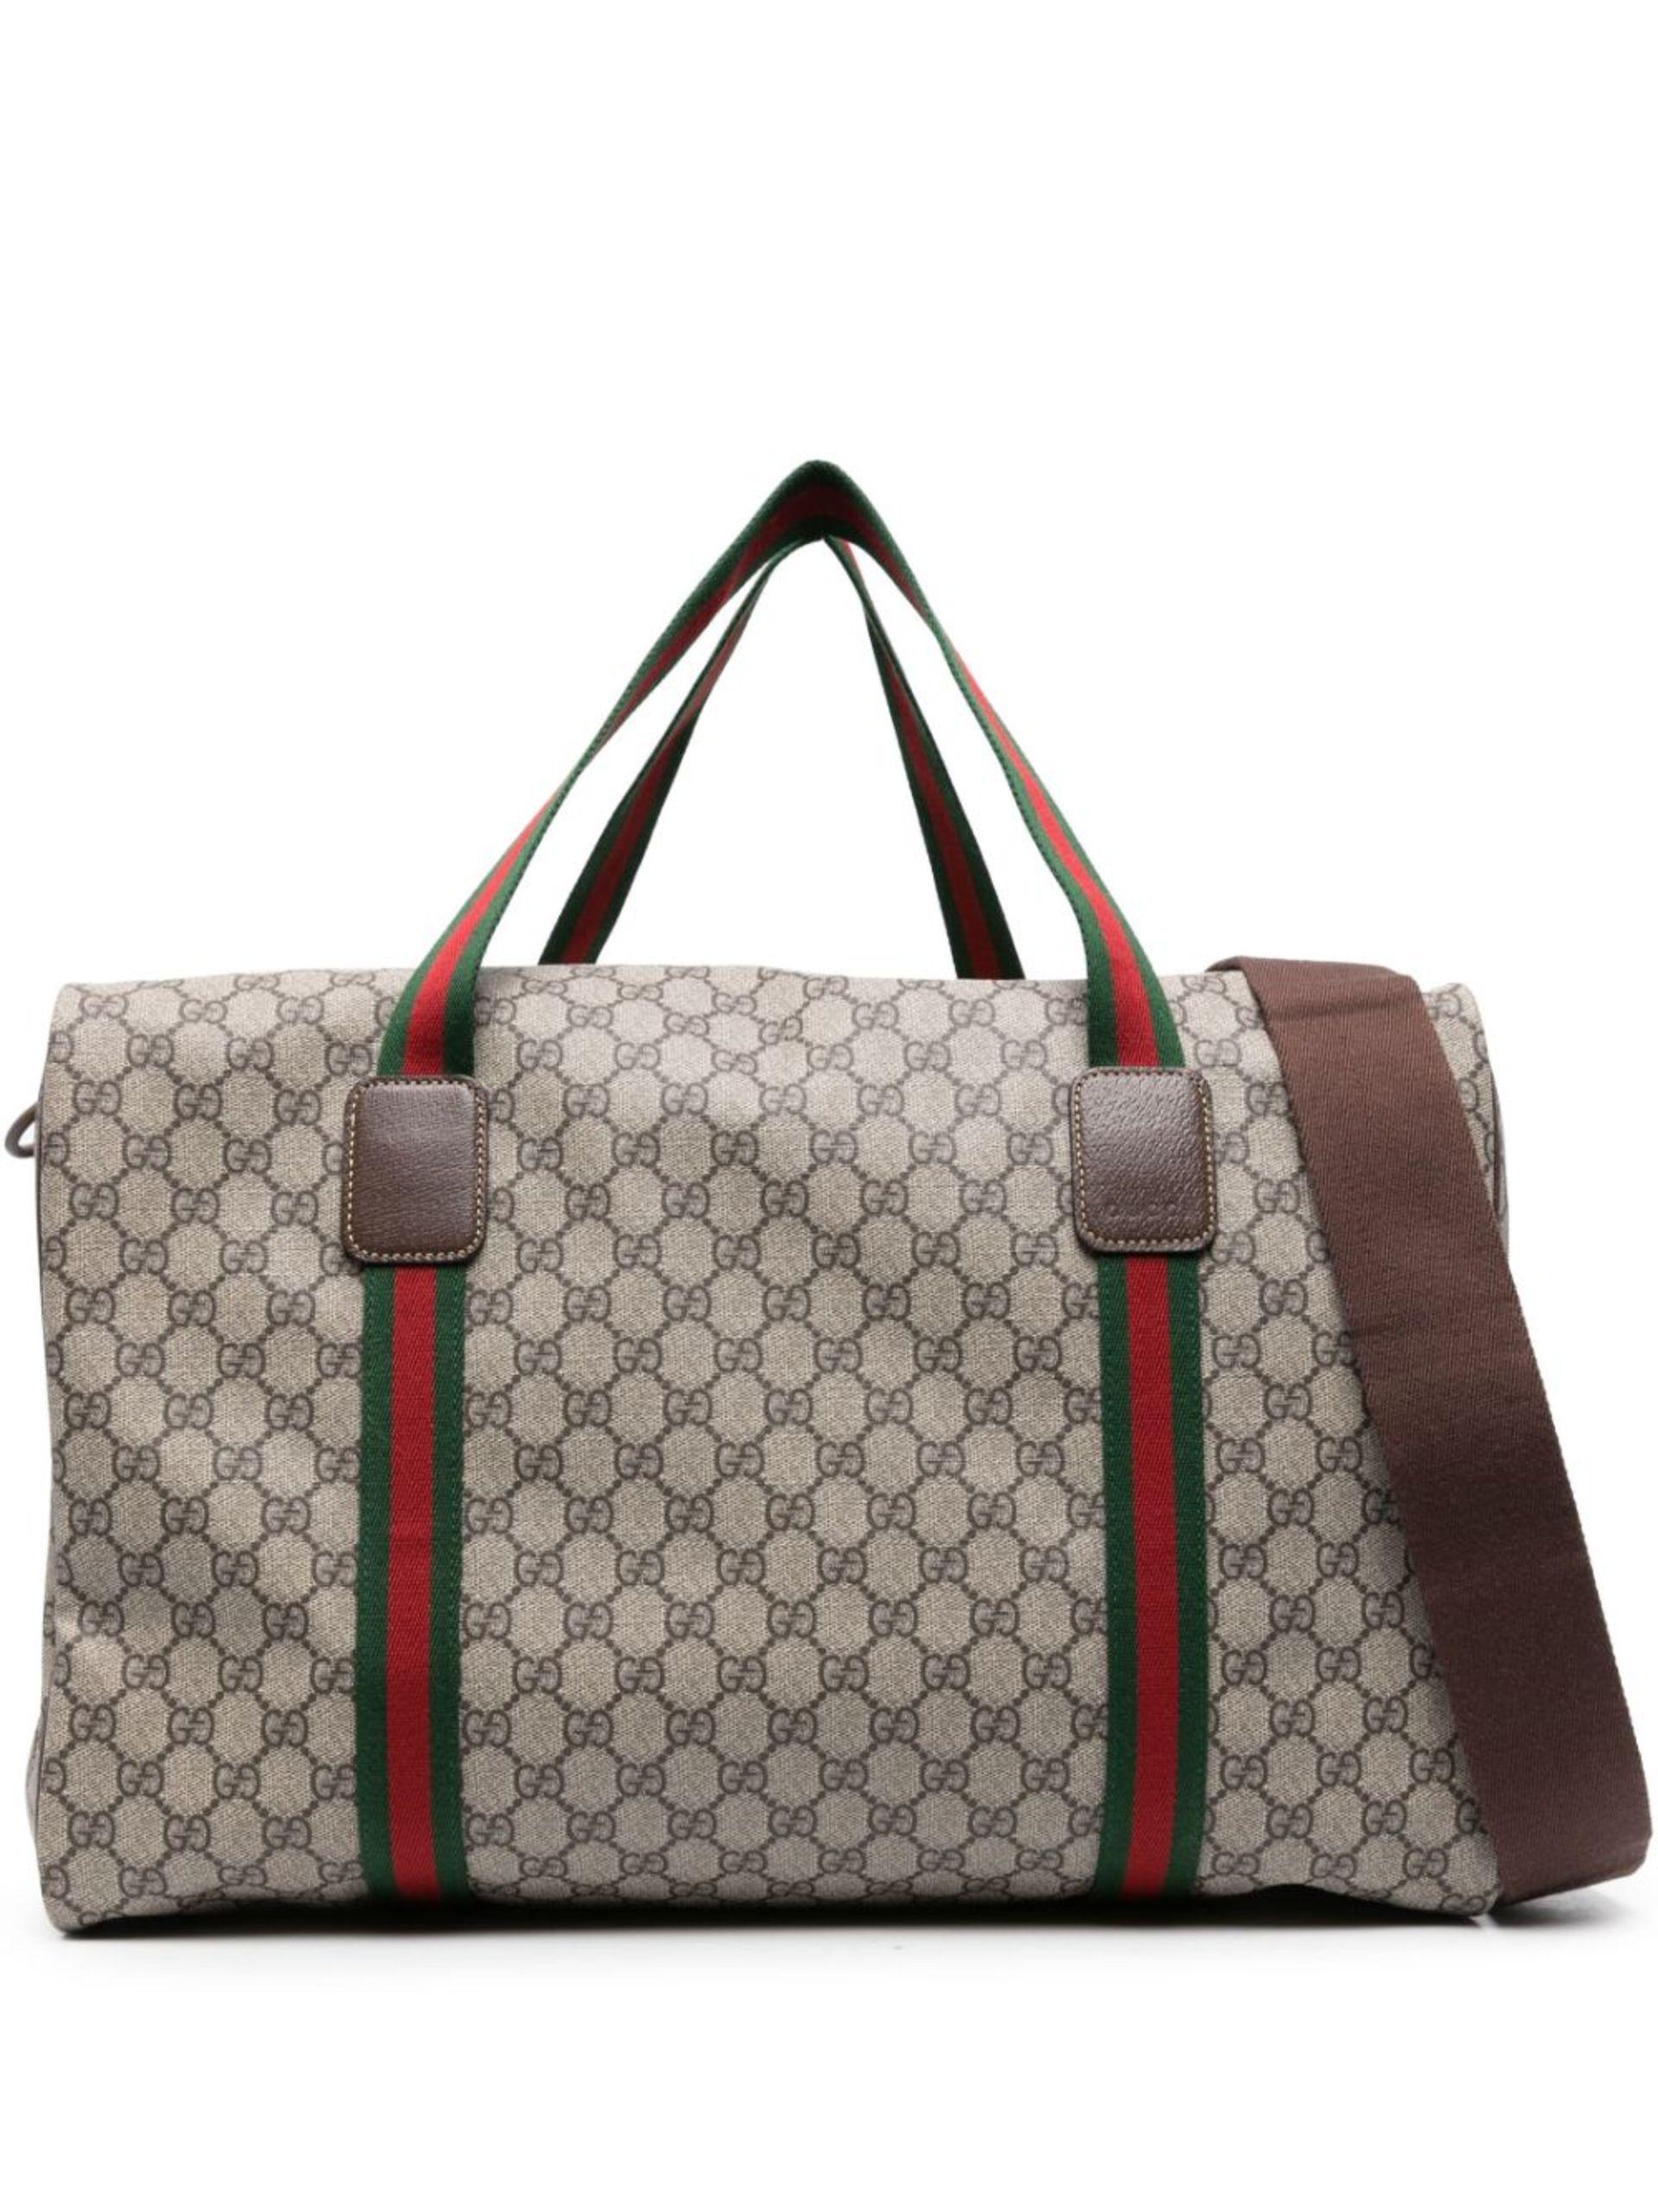 Gucci Neo Vintage Duffle Bag With Web in Natural